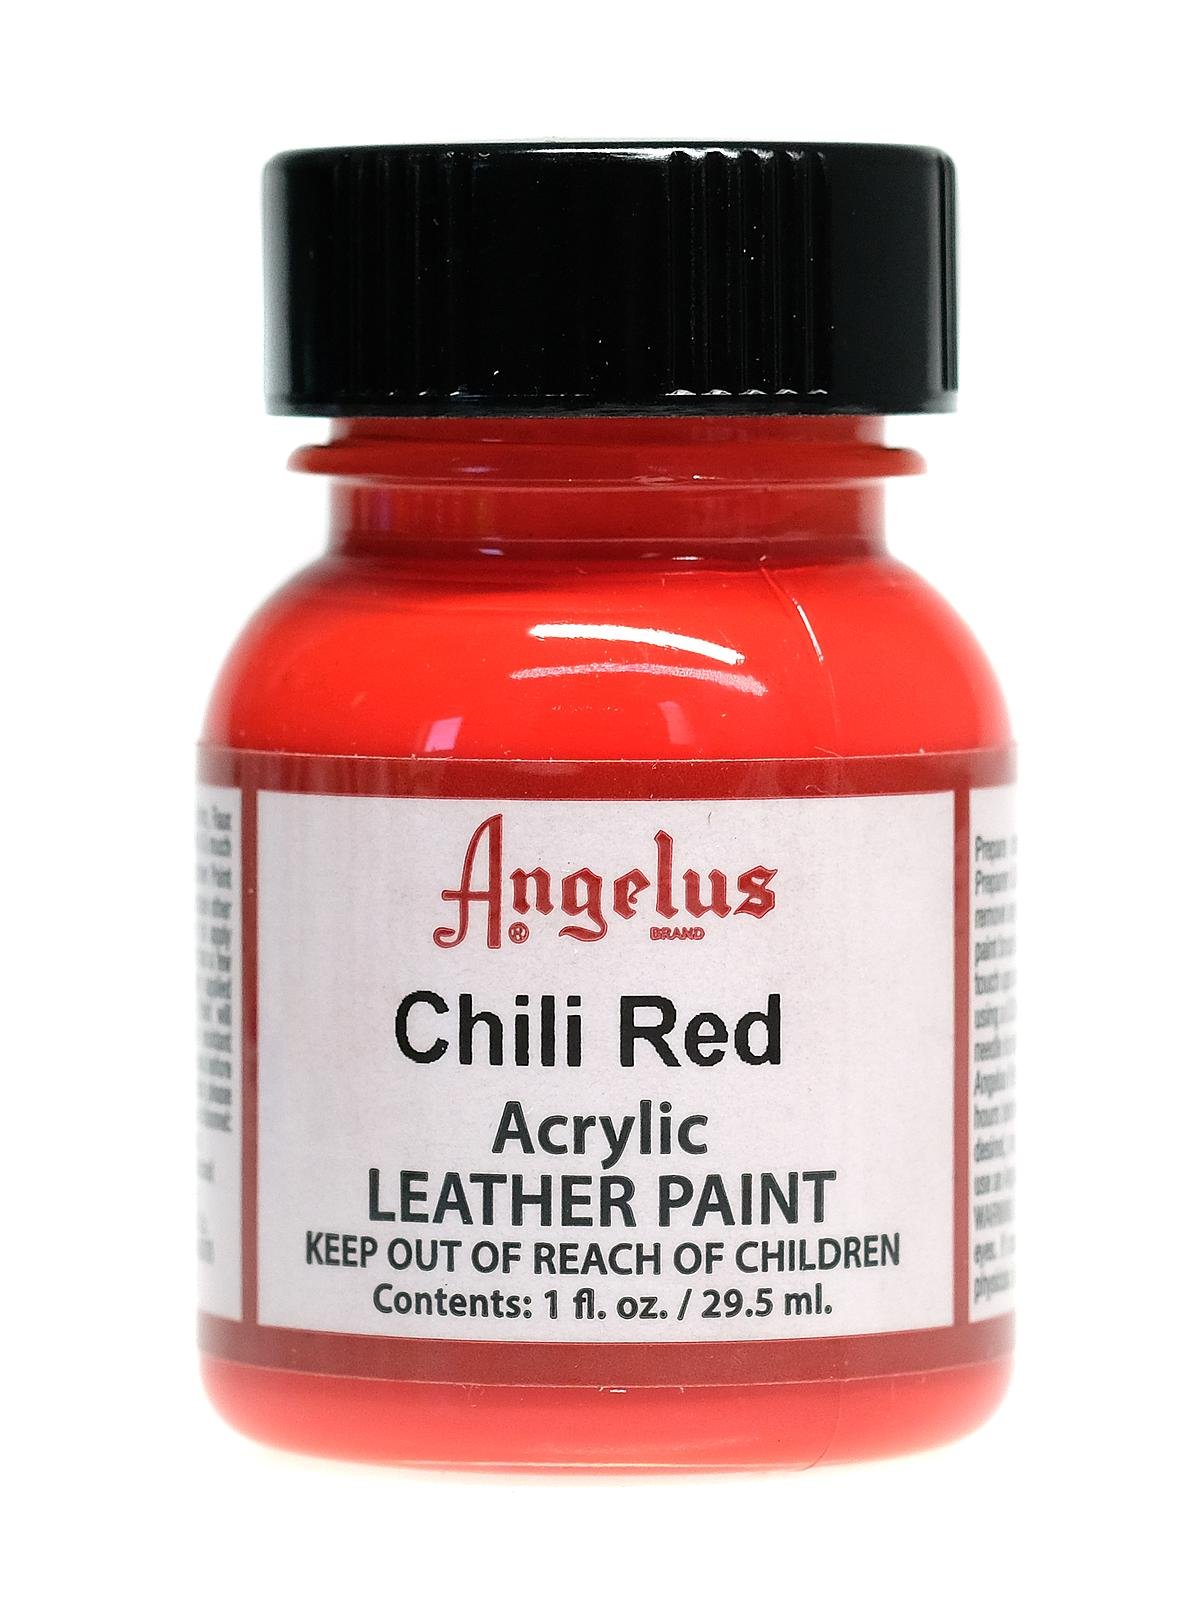  Angelus Terra-Cotta Red Acrylic Leather Paint